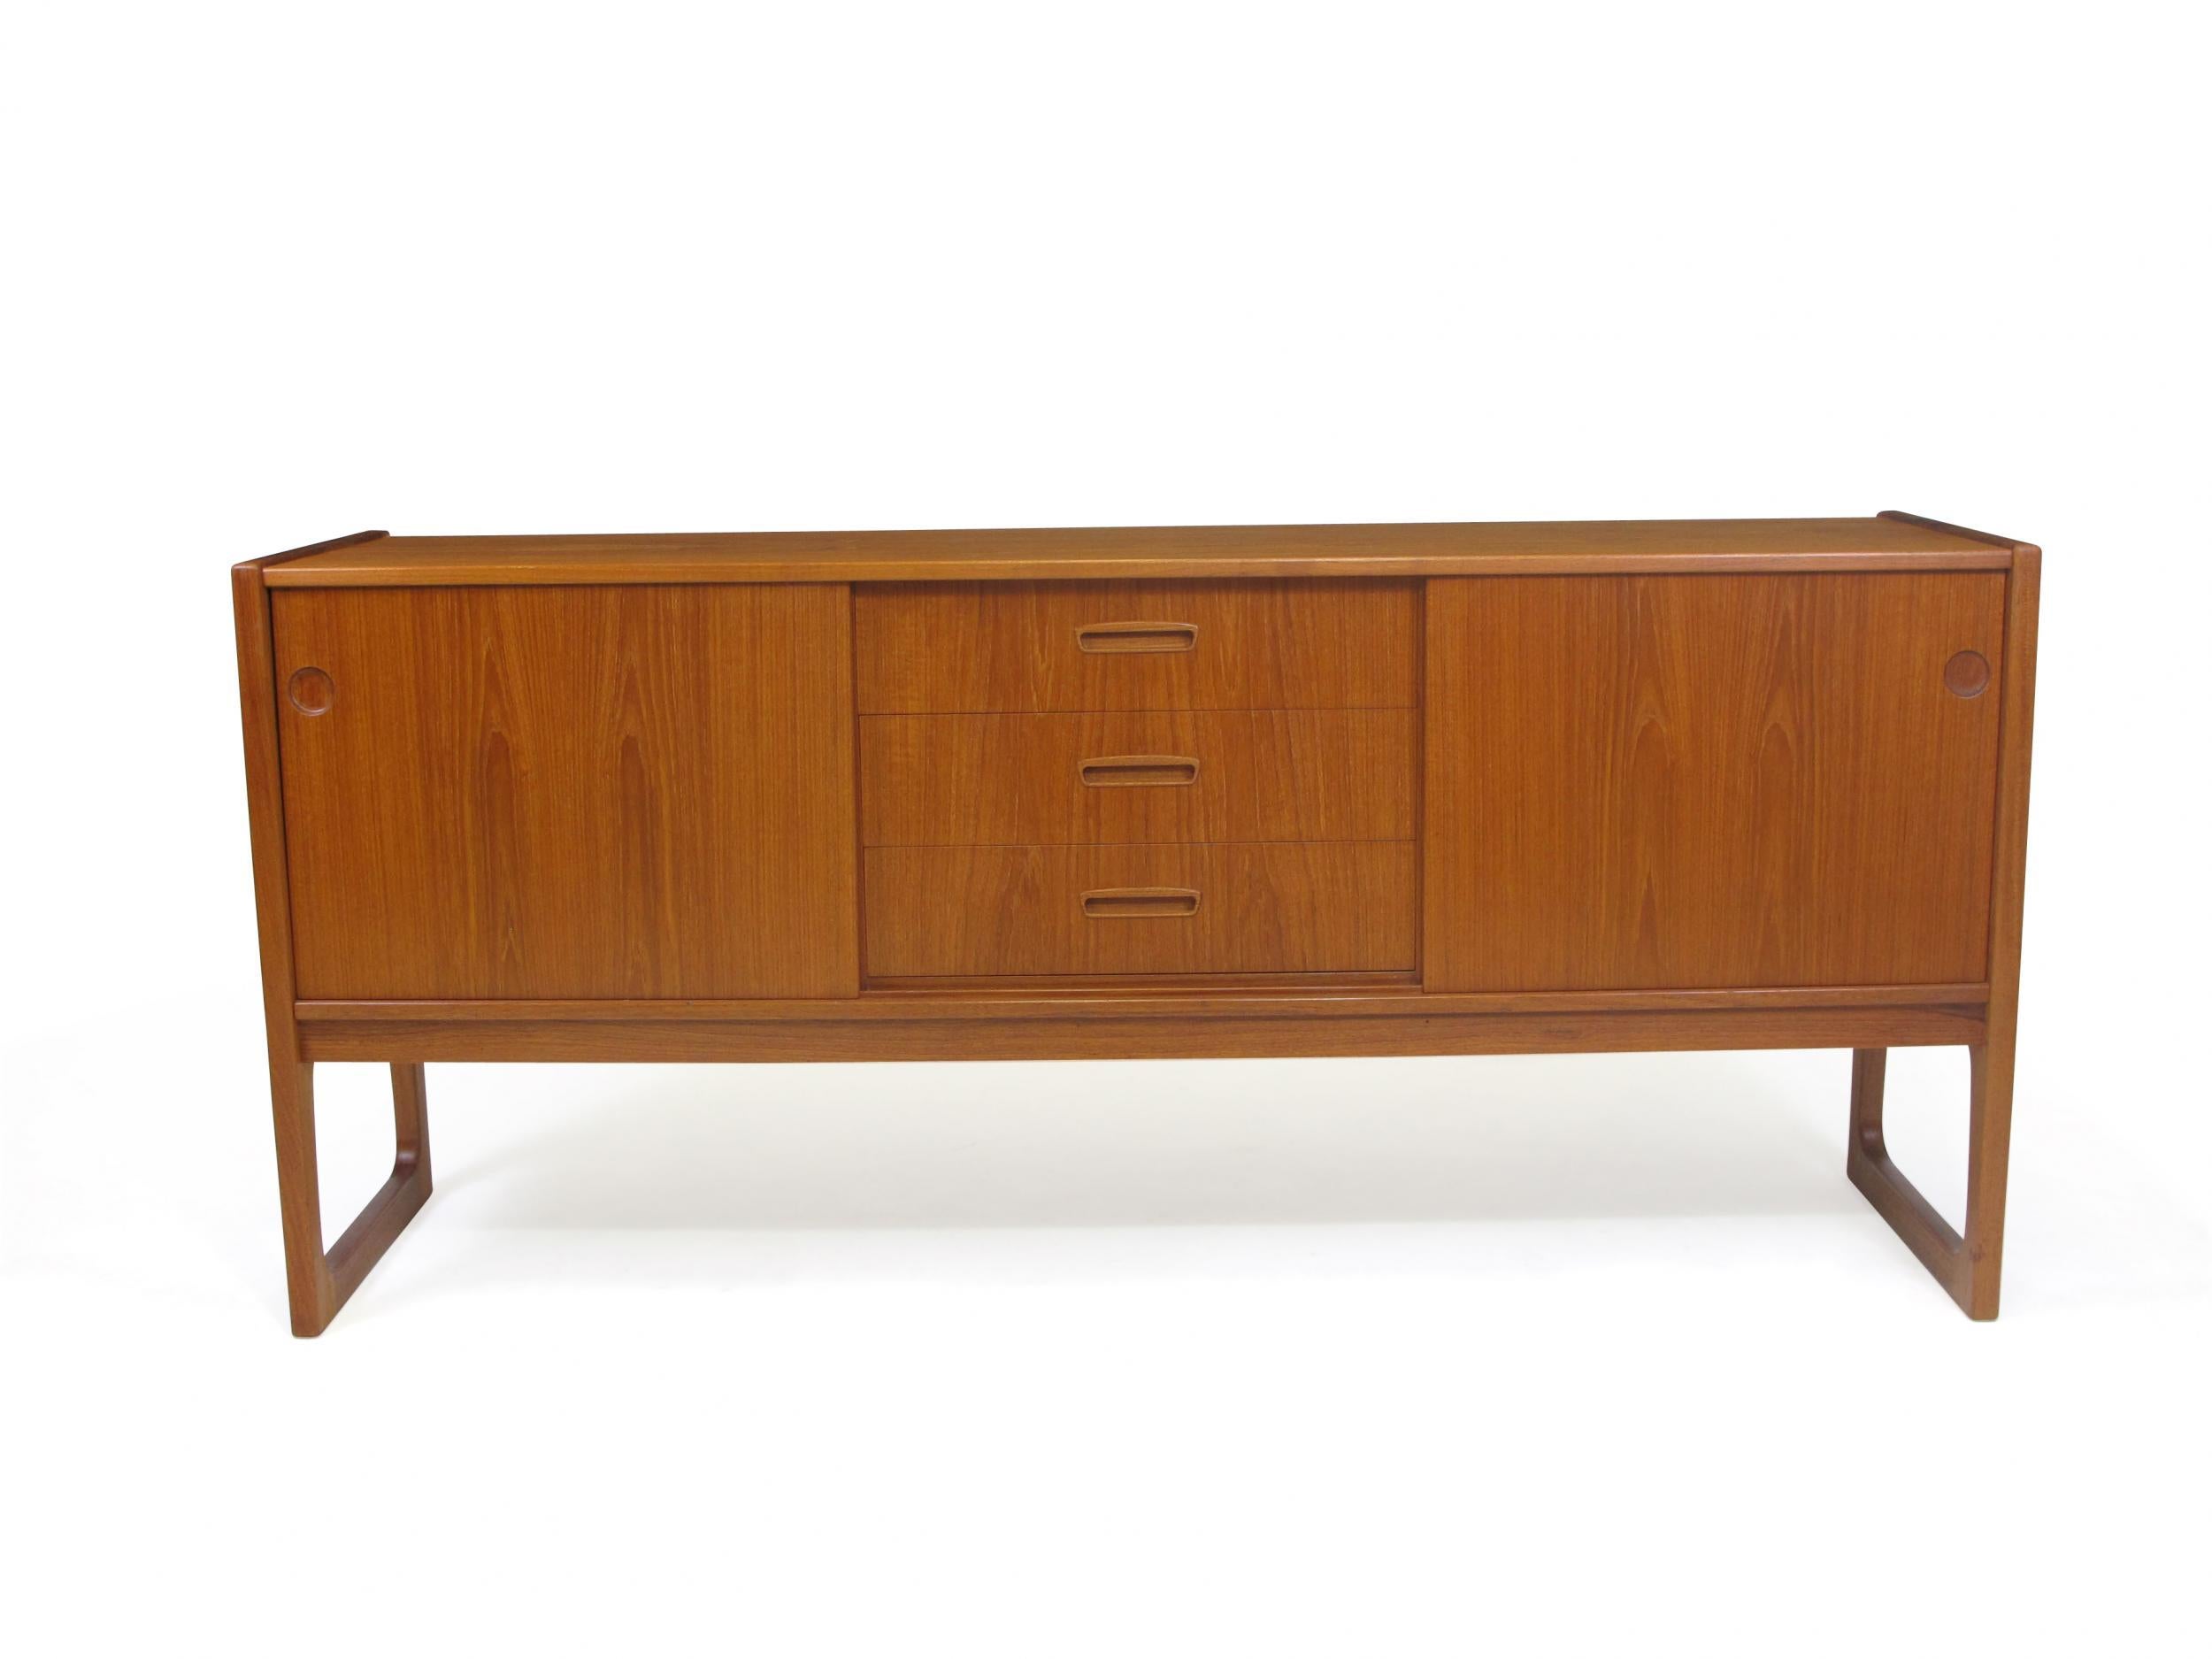 Oiled Danish Teak Credenza with Sliding Doors and Drawers